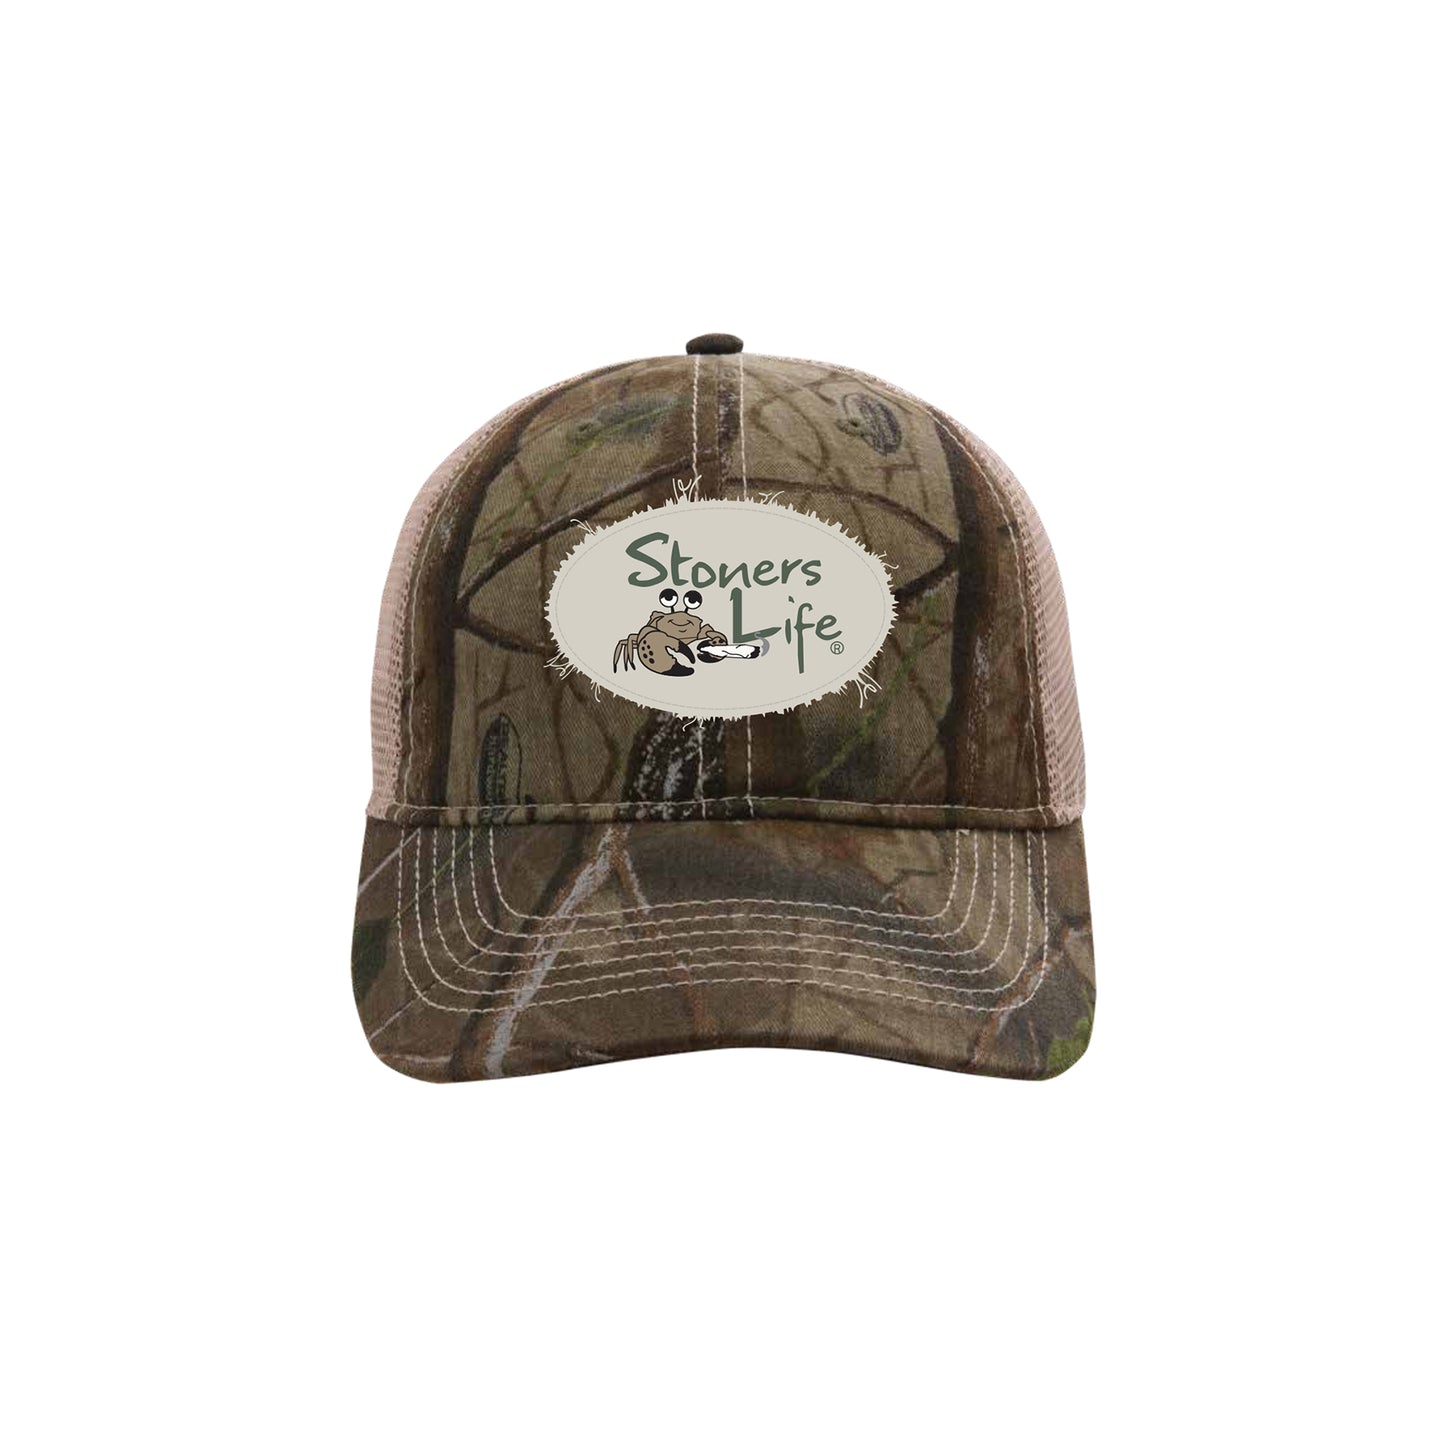 Camo Mid Fit Unstructured Hat, Distressed Snap Back